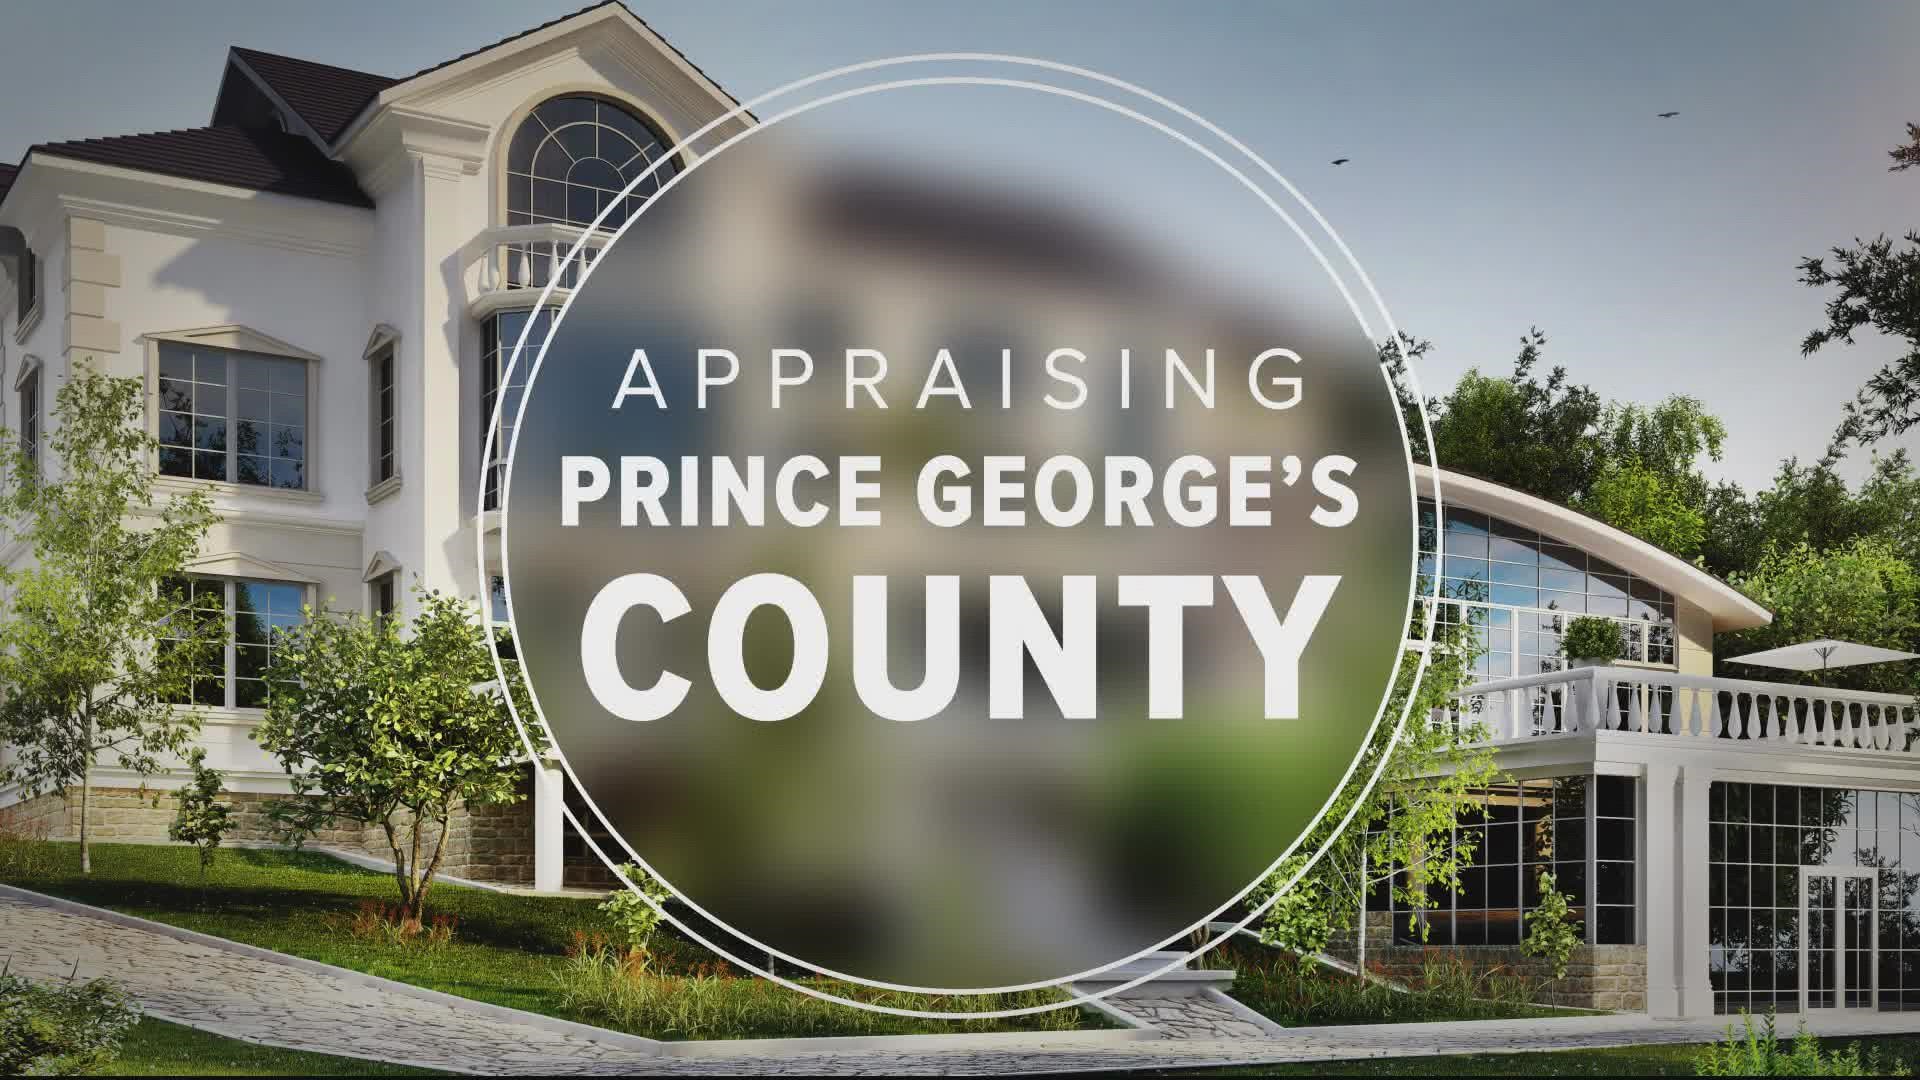 Technology is being used as a tool to fuel equity and innovation for Prince George's County homeowners experiencing appraisal bias.